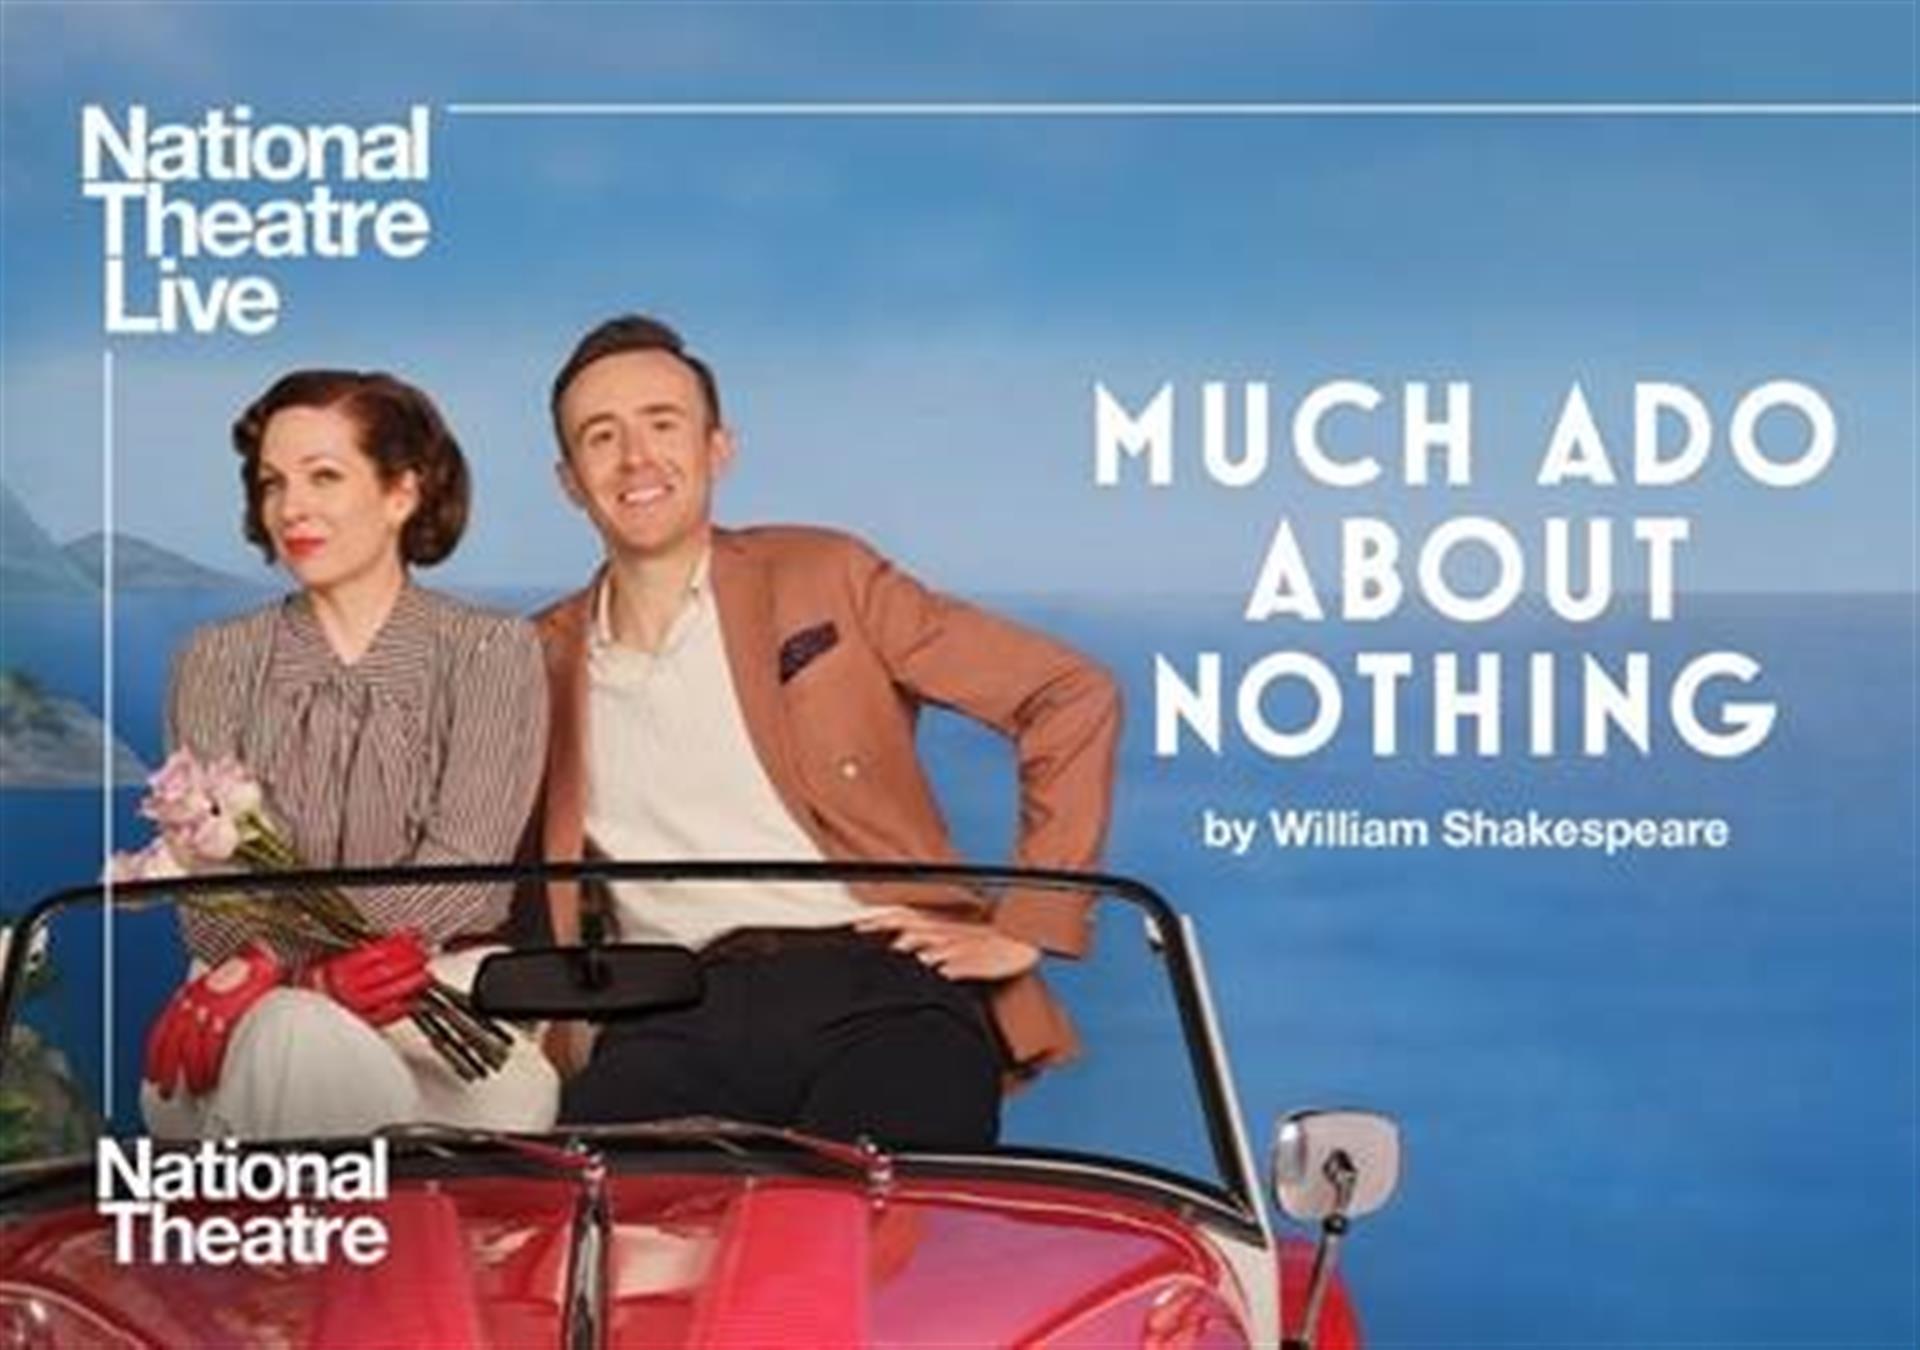 National Theatre Live: Much Ado About Nothing (12A) - Lowther Pavilion